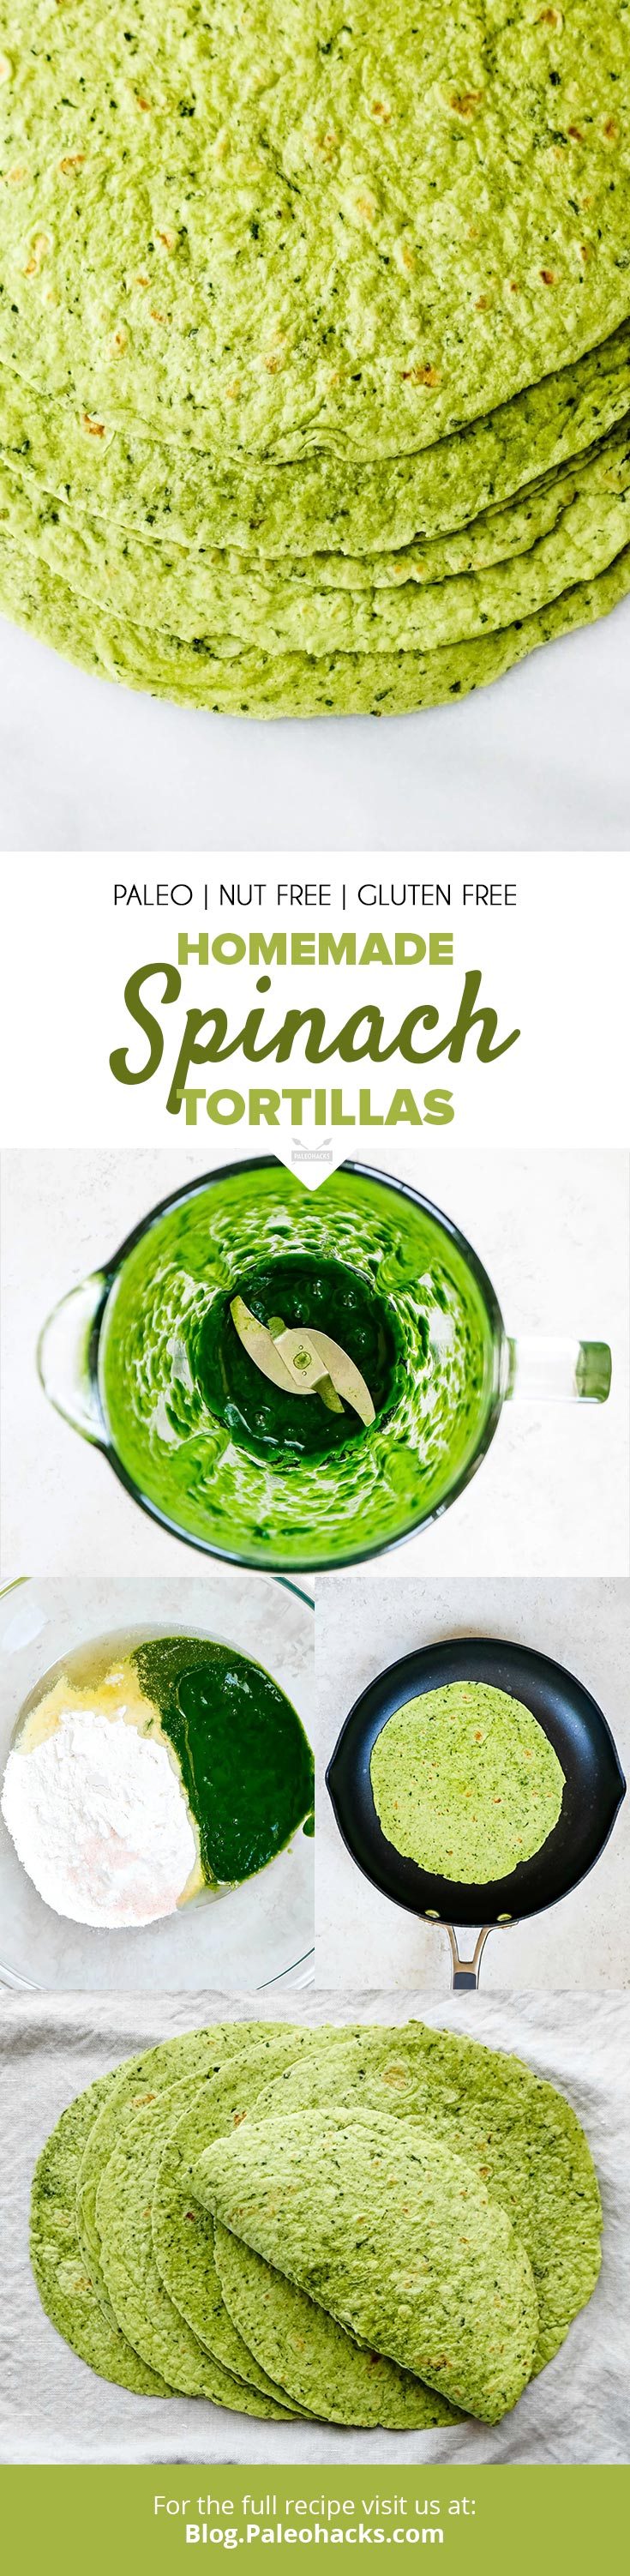 Containing zero grains or corn - these spinach tortillas are made with just five Paleo-friendly ingredients.